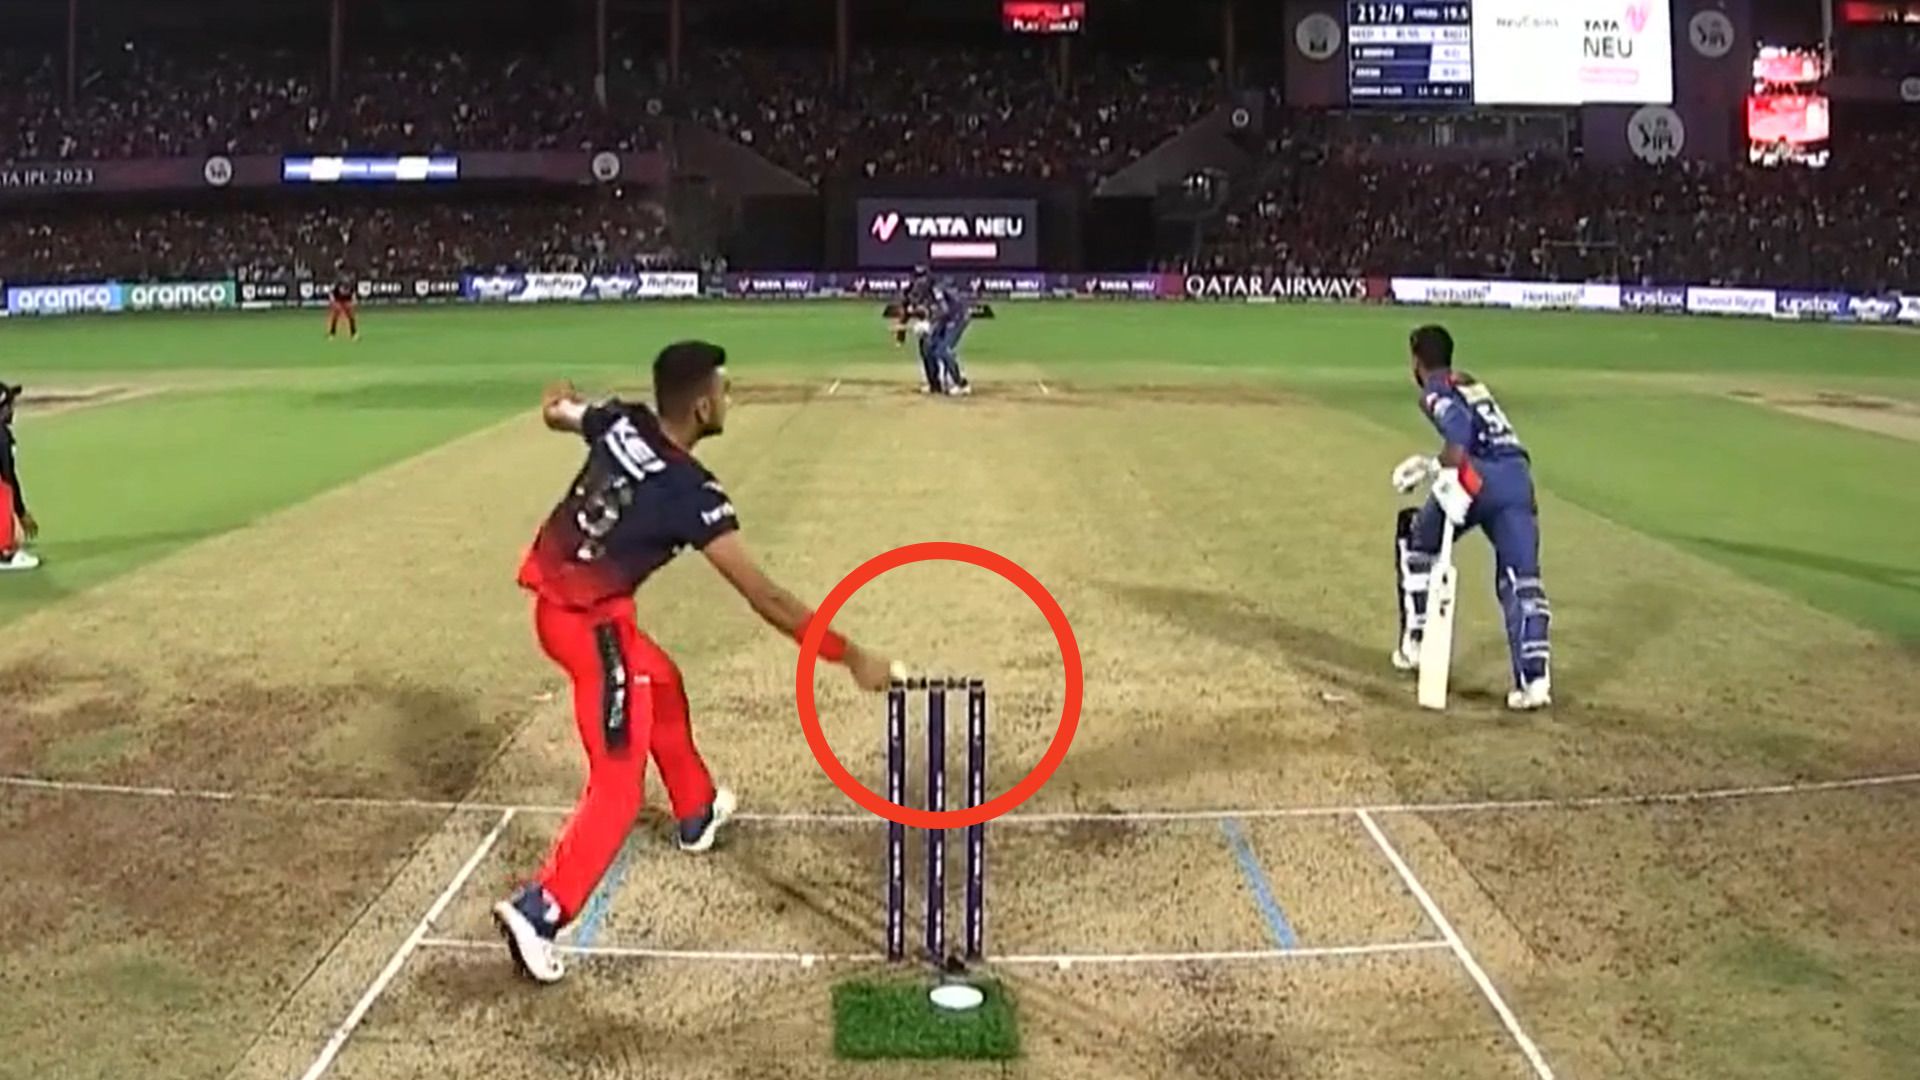 The moment Harshal Patel tried and failed to run out Avesh Khanl.